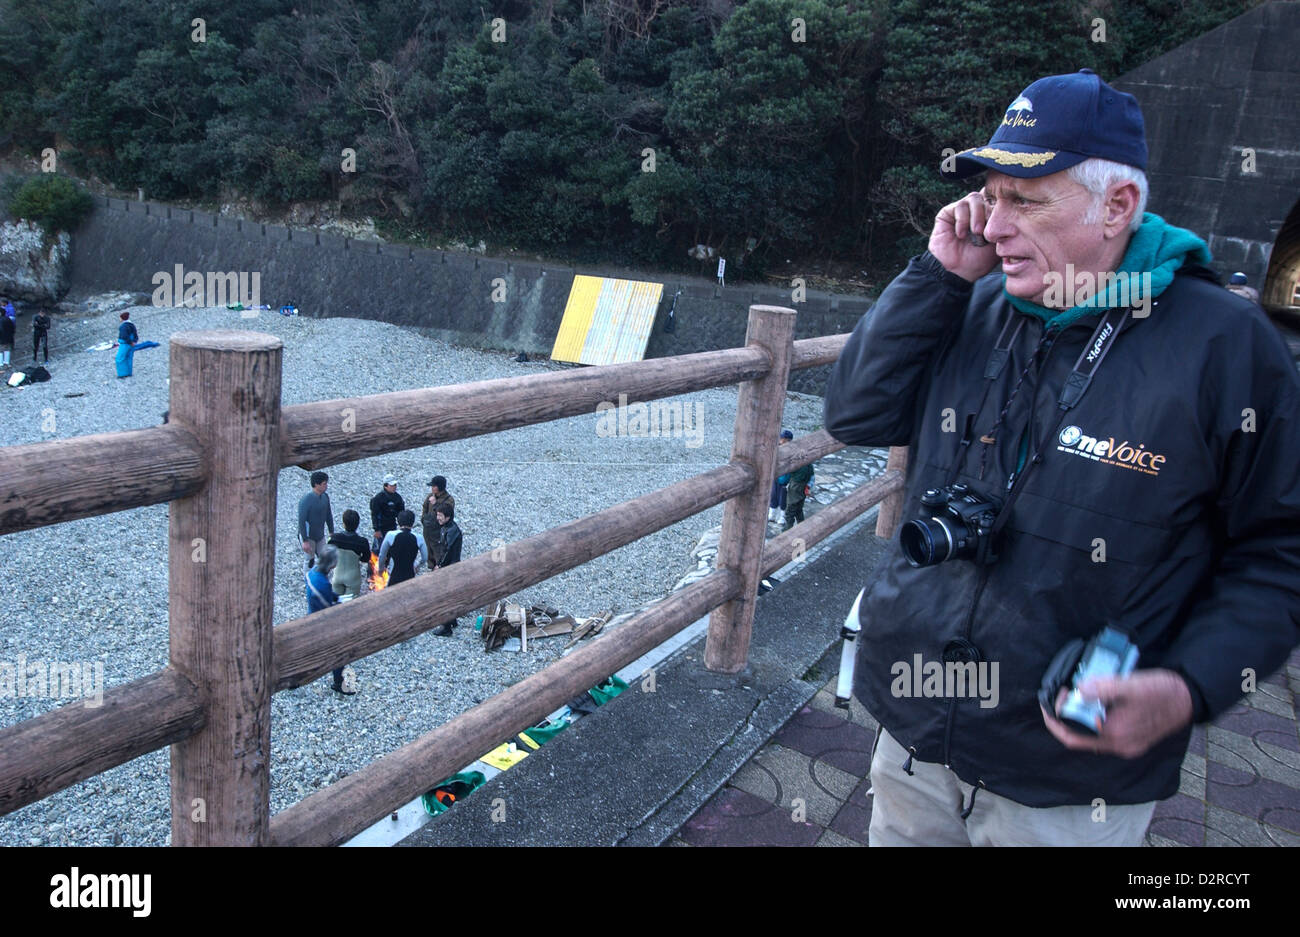 Ex dolphin trainer and activist Ric O'Barry at the cove in Taiji, Wakayama prefecture, Japan Stock Photo